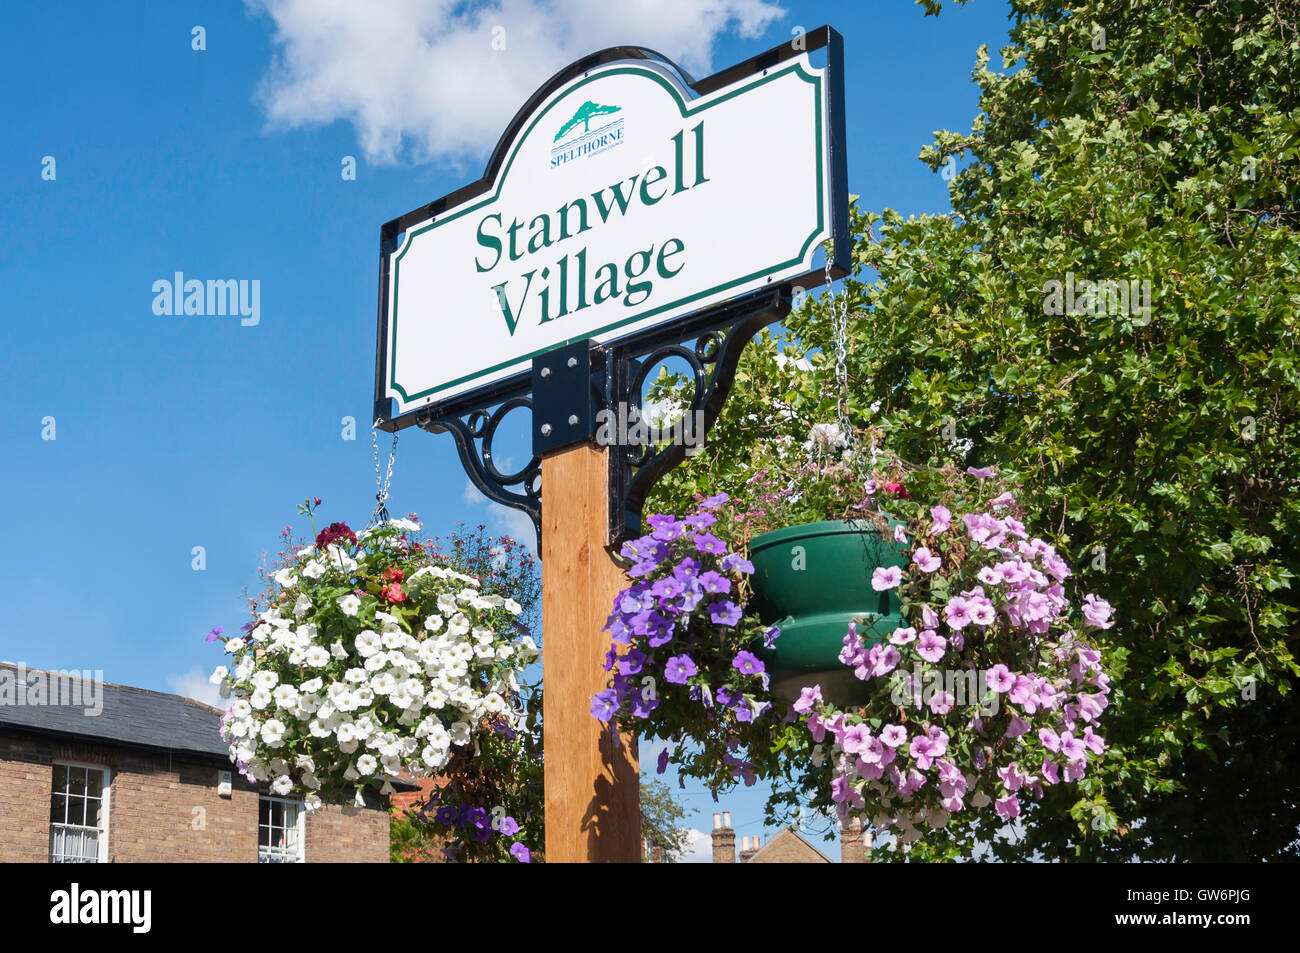 Village sign on Green, High Street, Stanwell Village, Stanwell, Surrey, England, United Kingdom Stock Photo